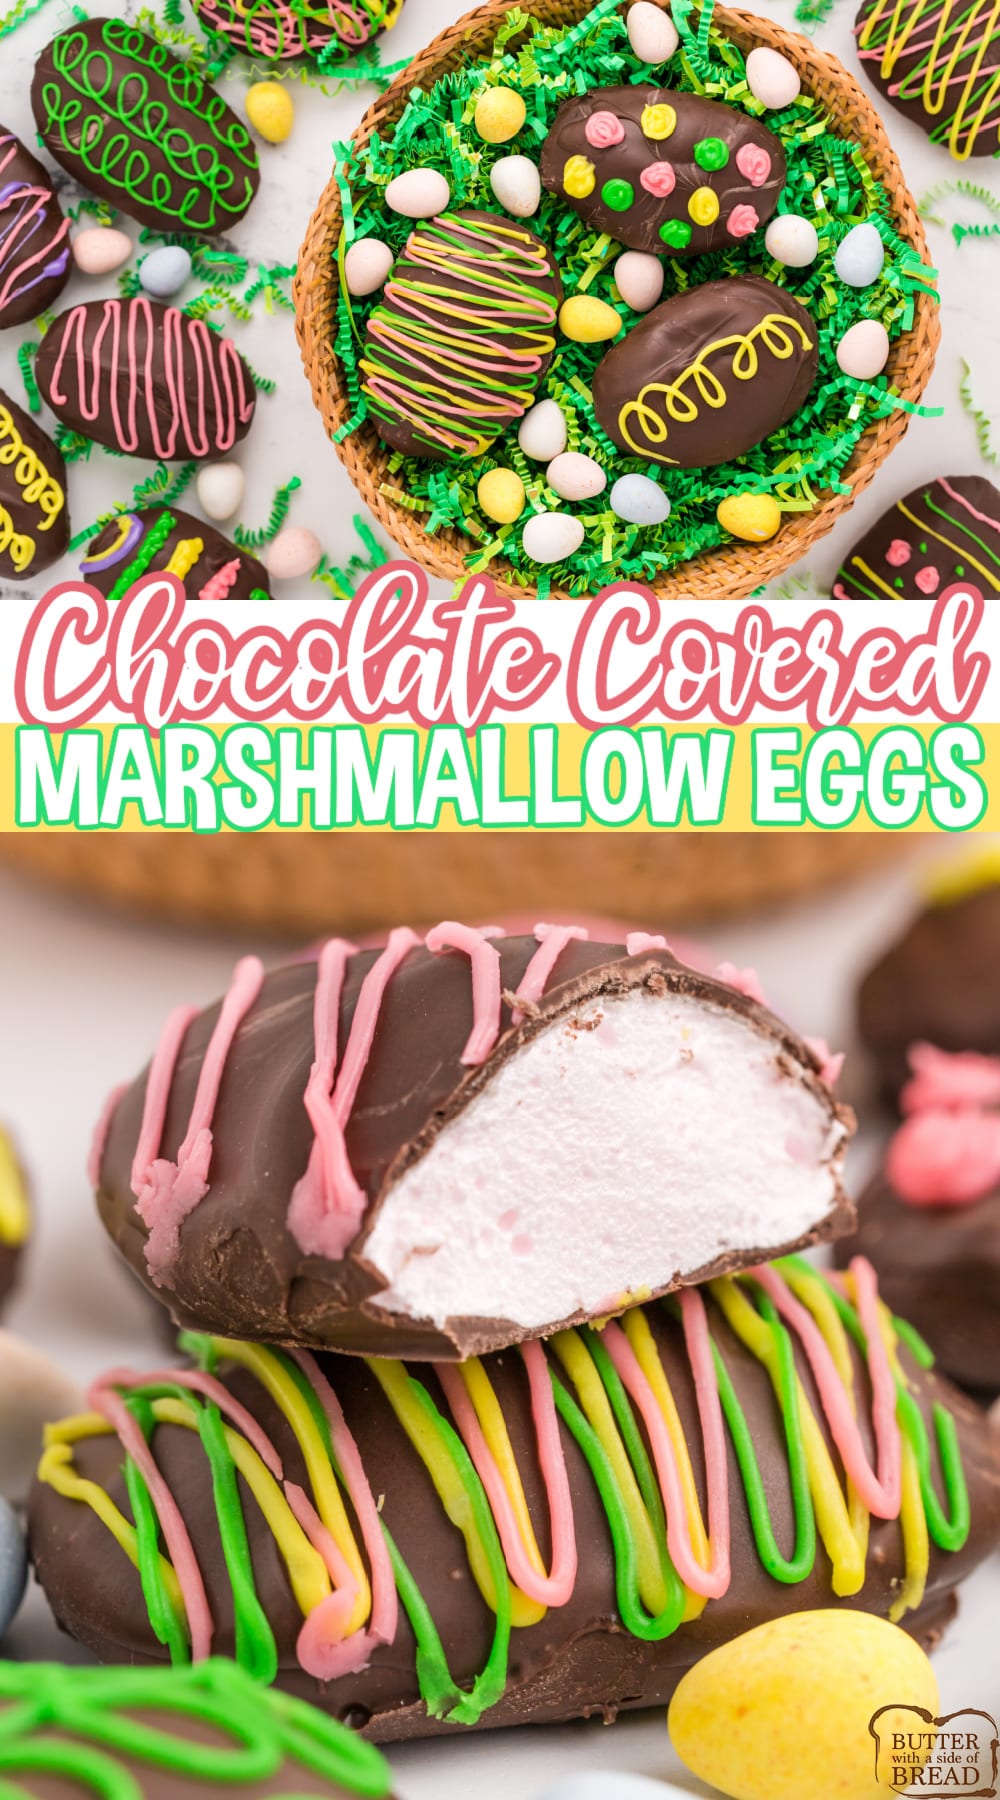 Chocolate Covered Marshmallow Eggs are so fun to make for Easter! Marshmallow Eggs can be made in any flavor and they taste so much better than the store-bought variety.